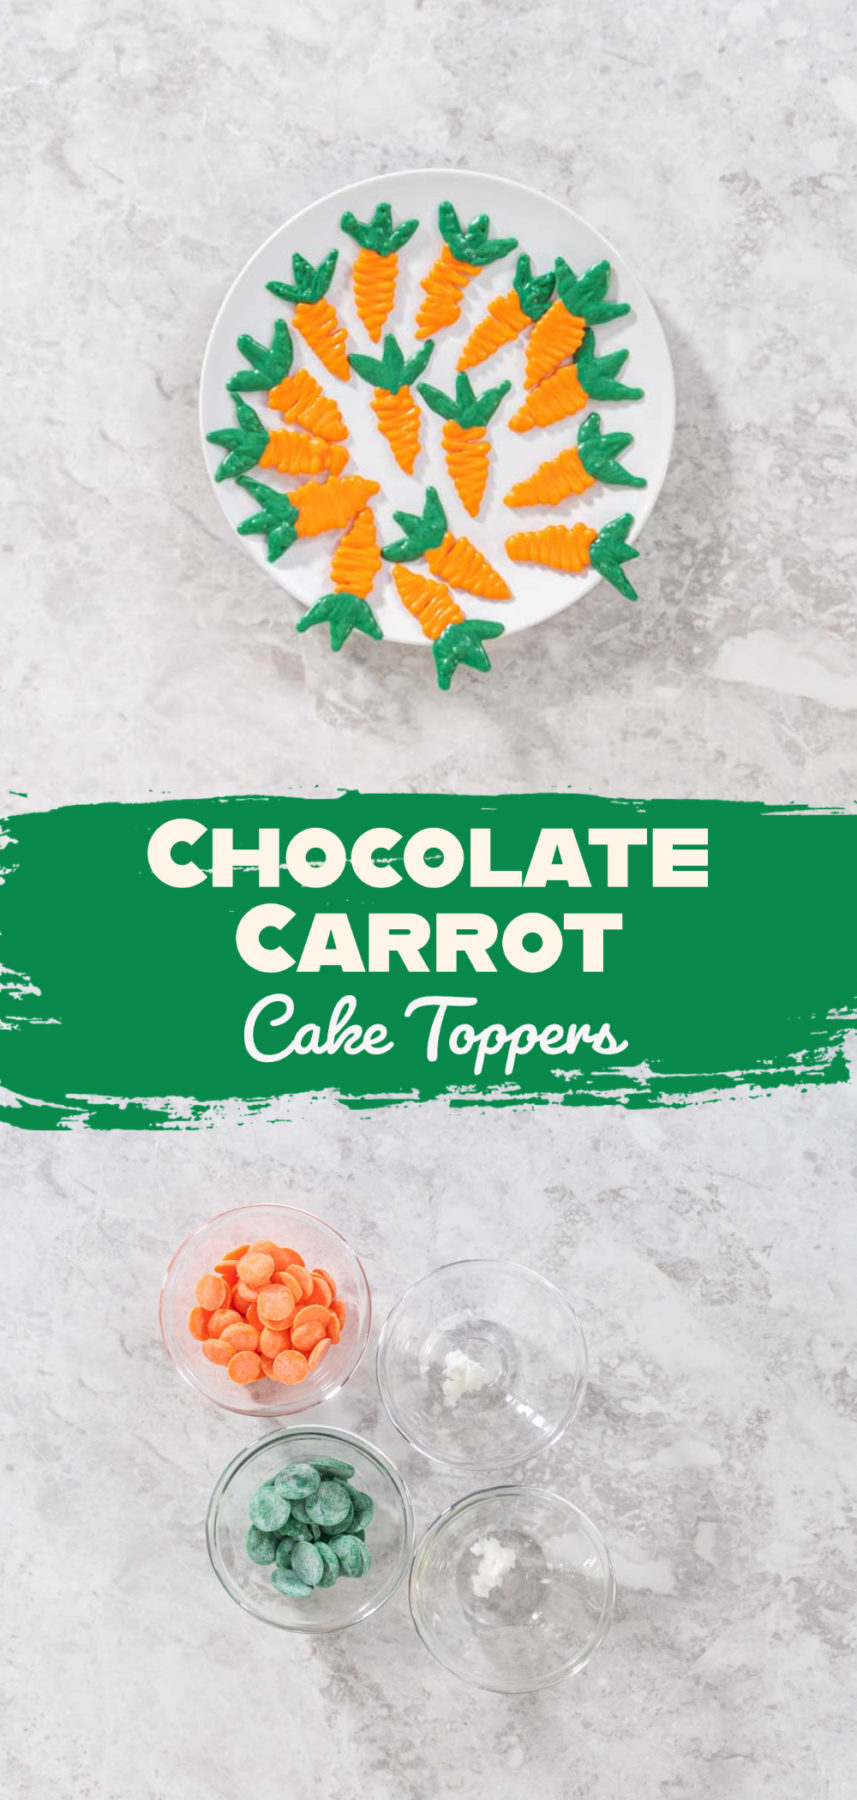 Chocolate Carrot Cake Toppers